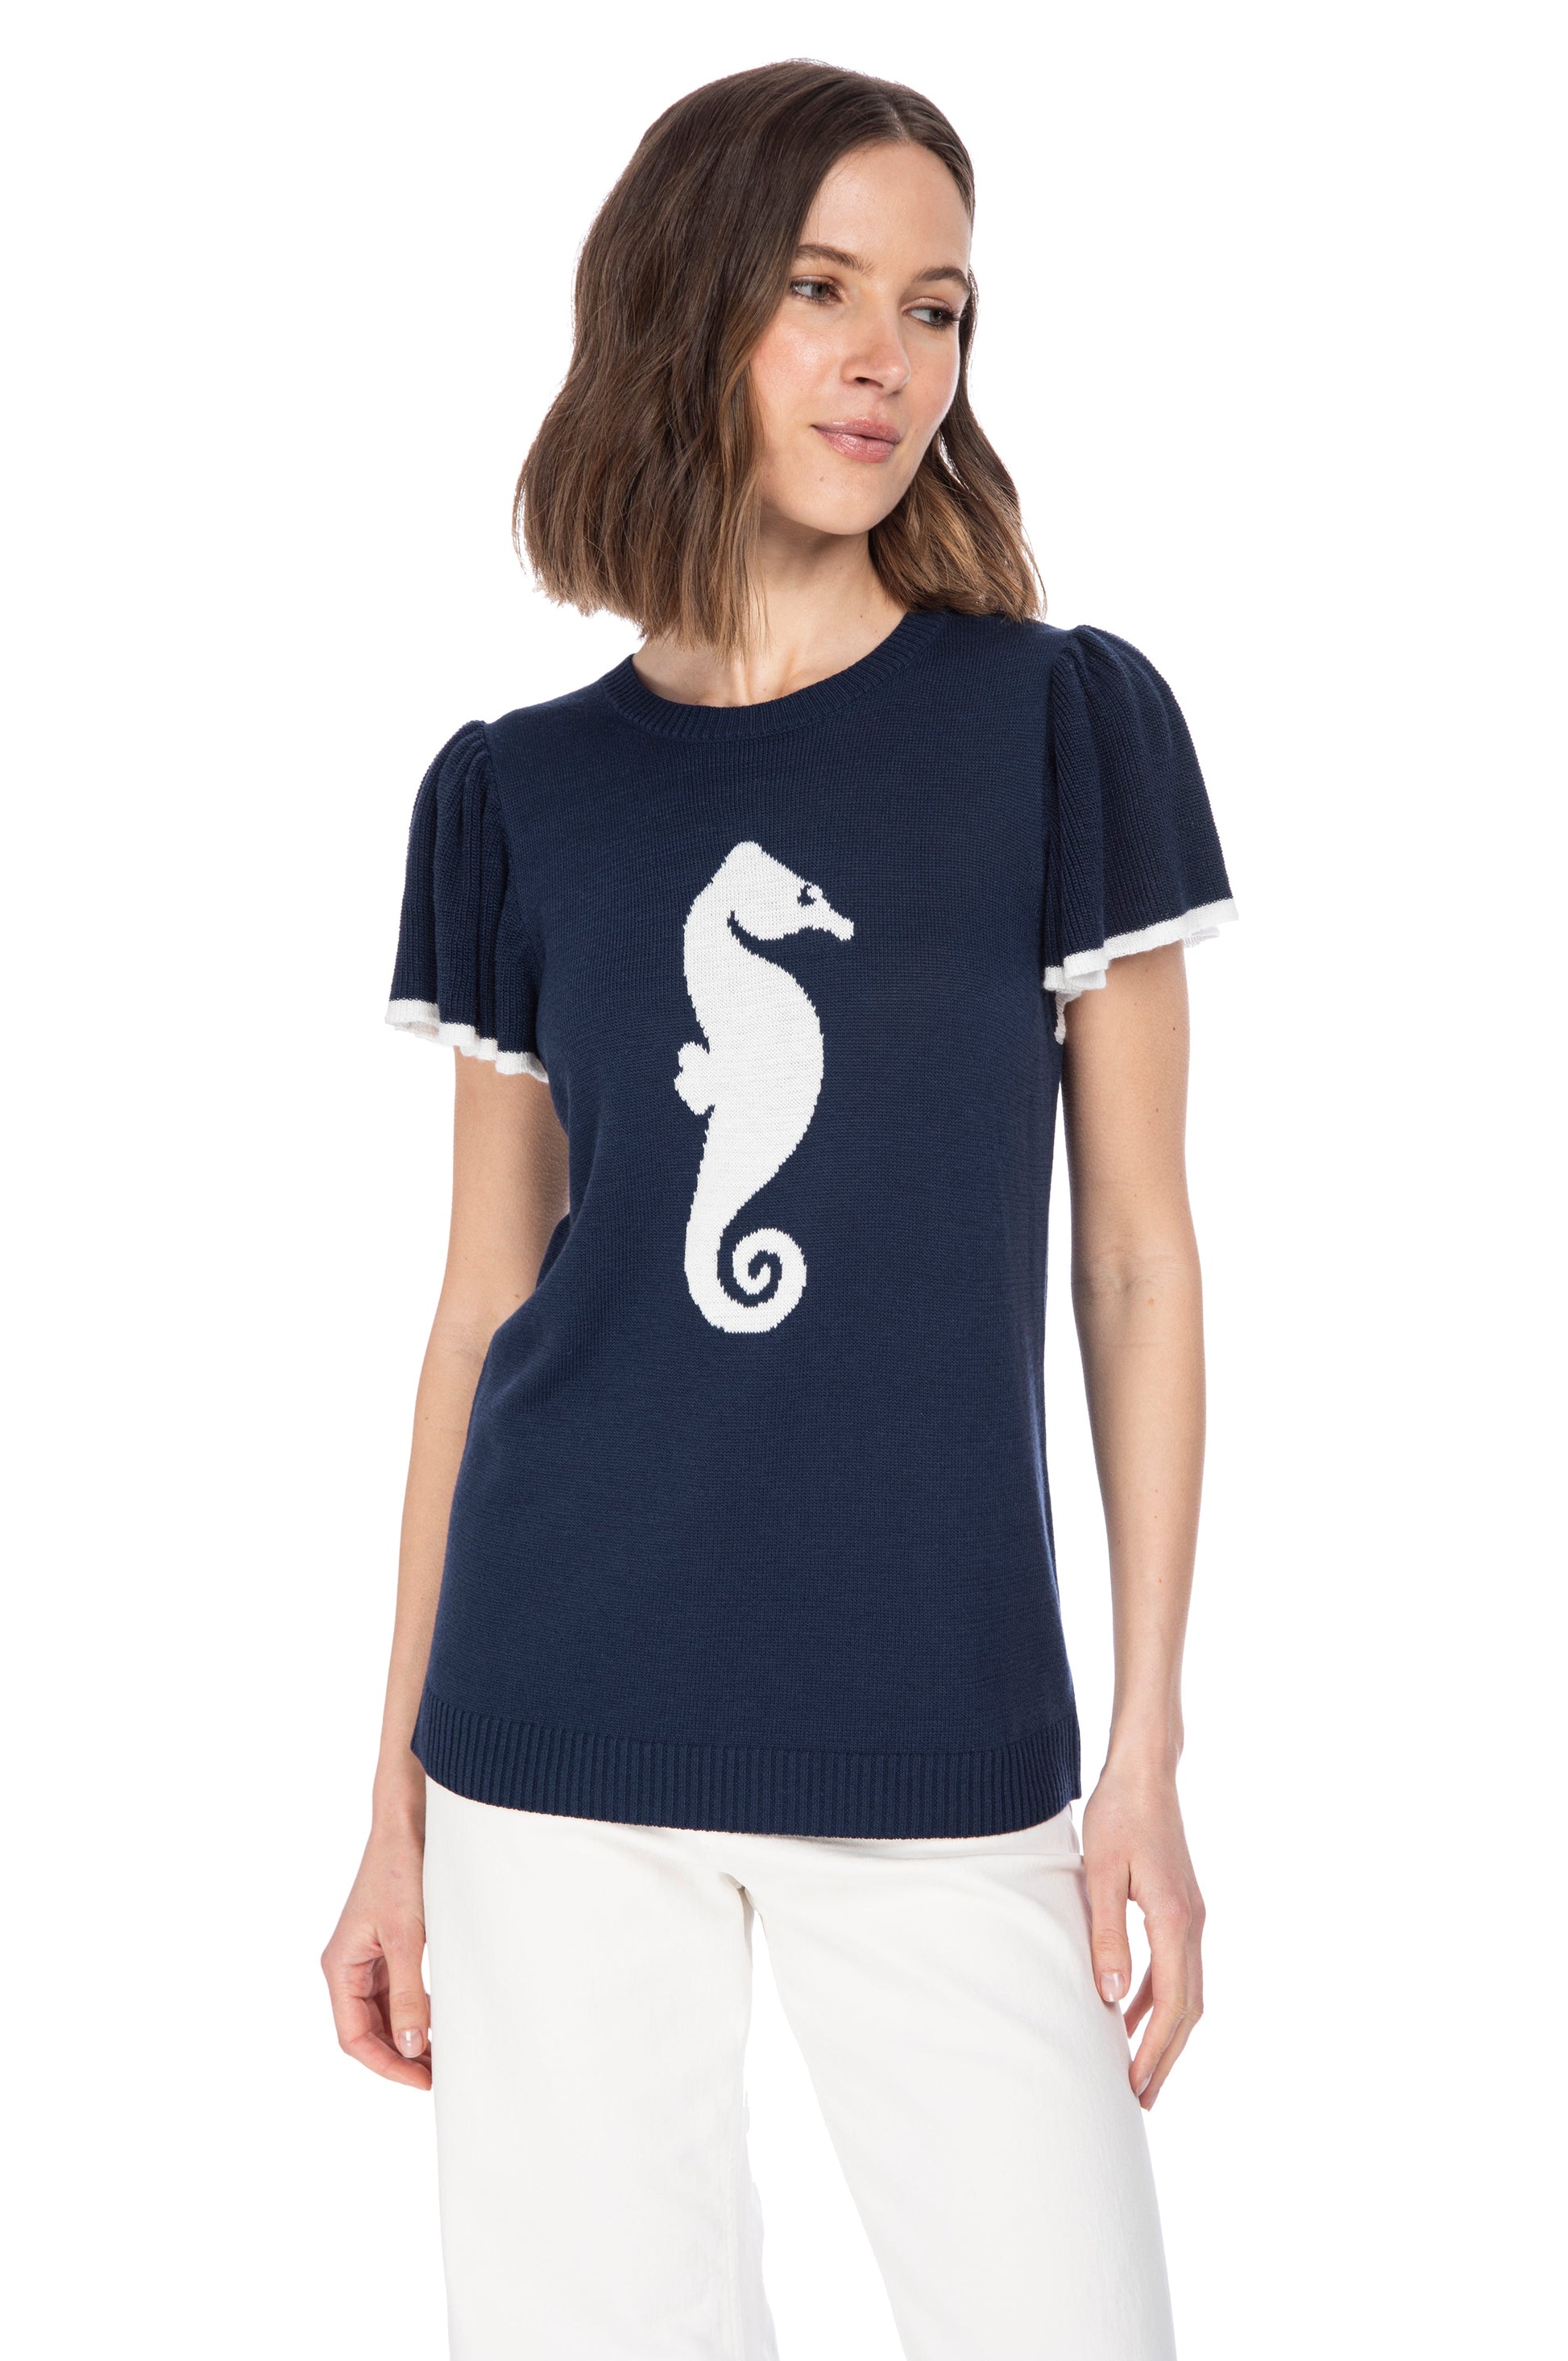 A woman in a chic navy blue SS Flutter Sleeve Top from B Collection by Bobeau with a white seahorse icon and stylish fringed sleeves, paired with crisp white pants, posing against a white background for a fresh, nautical look.